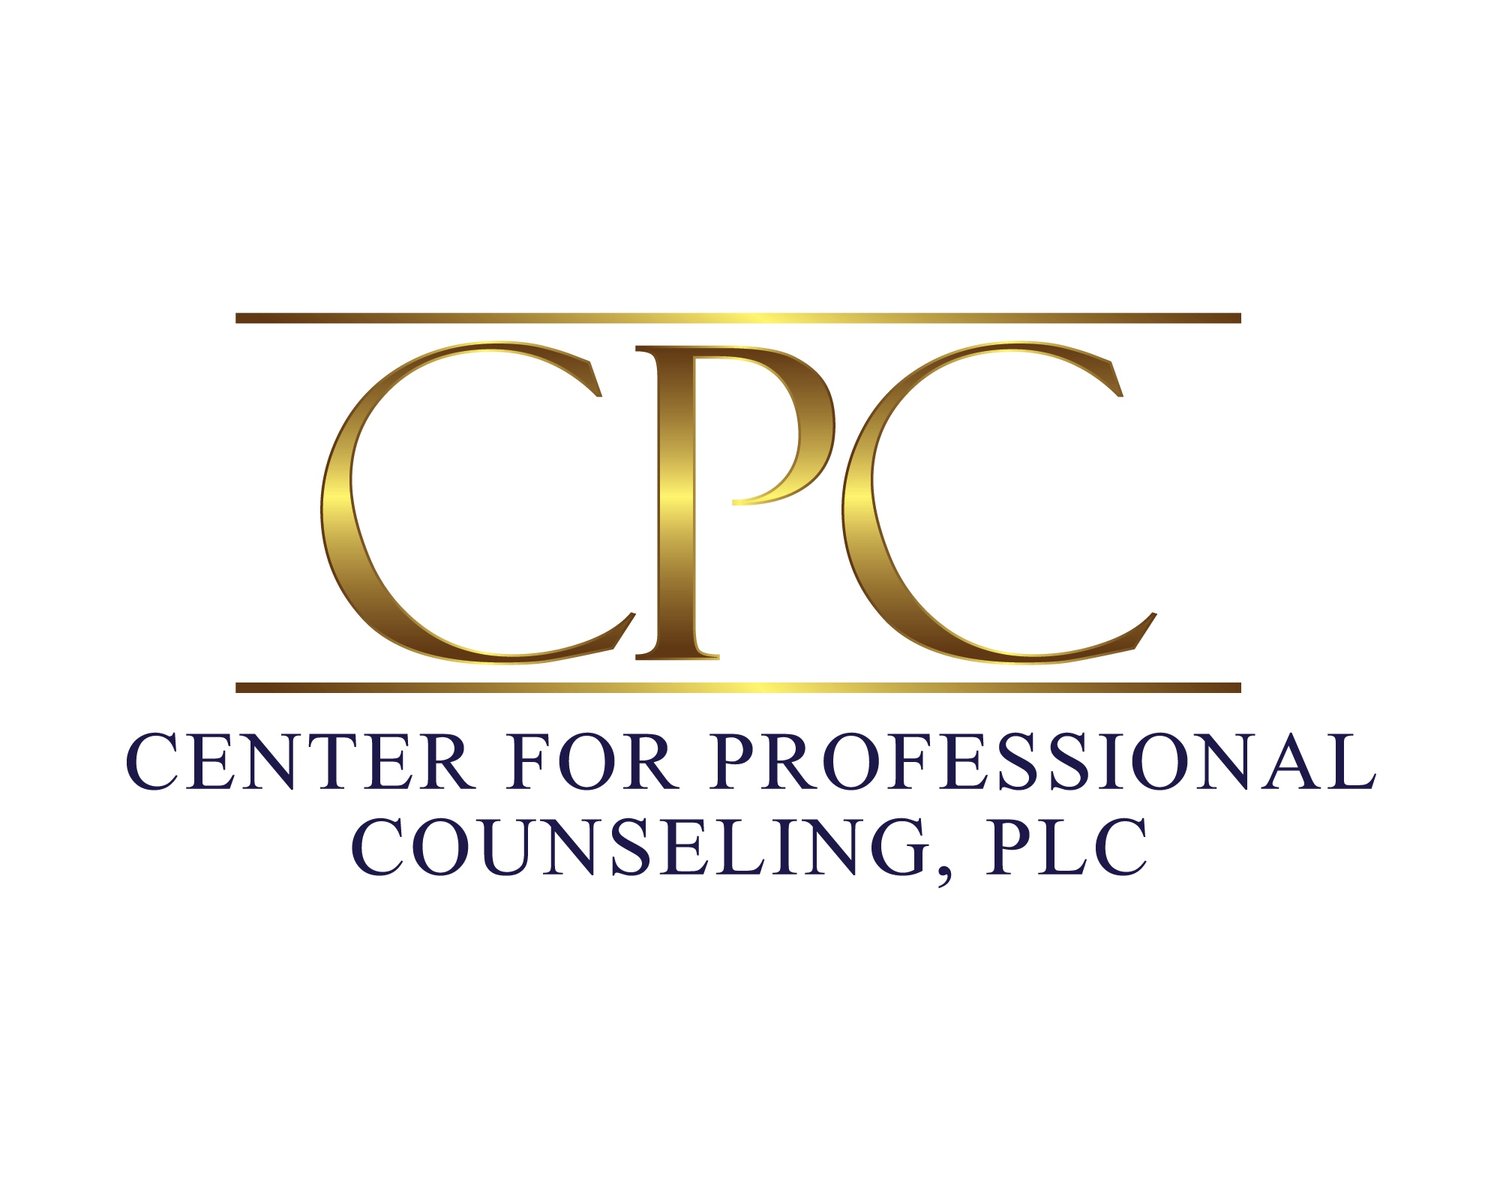 centerforprofessionalcounseling.com